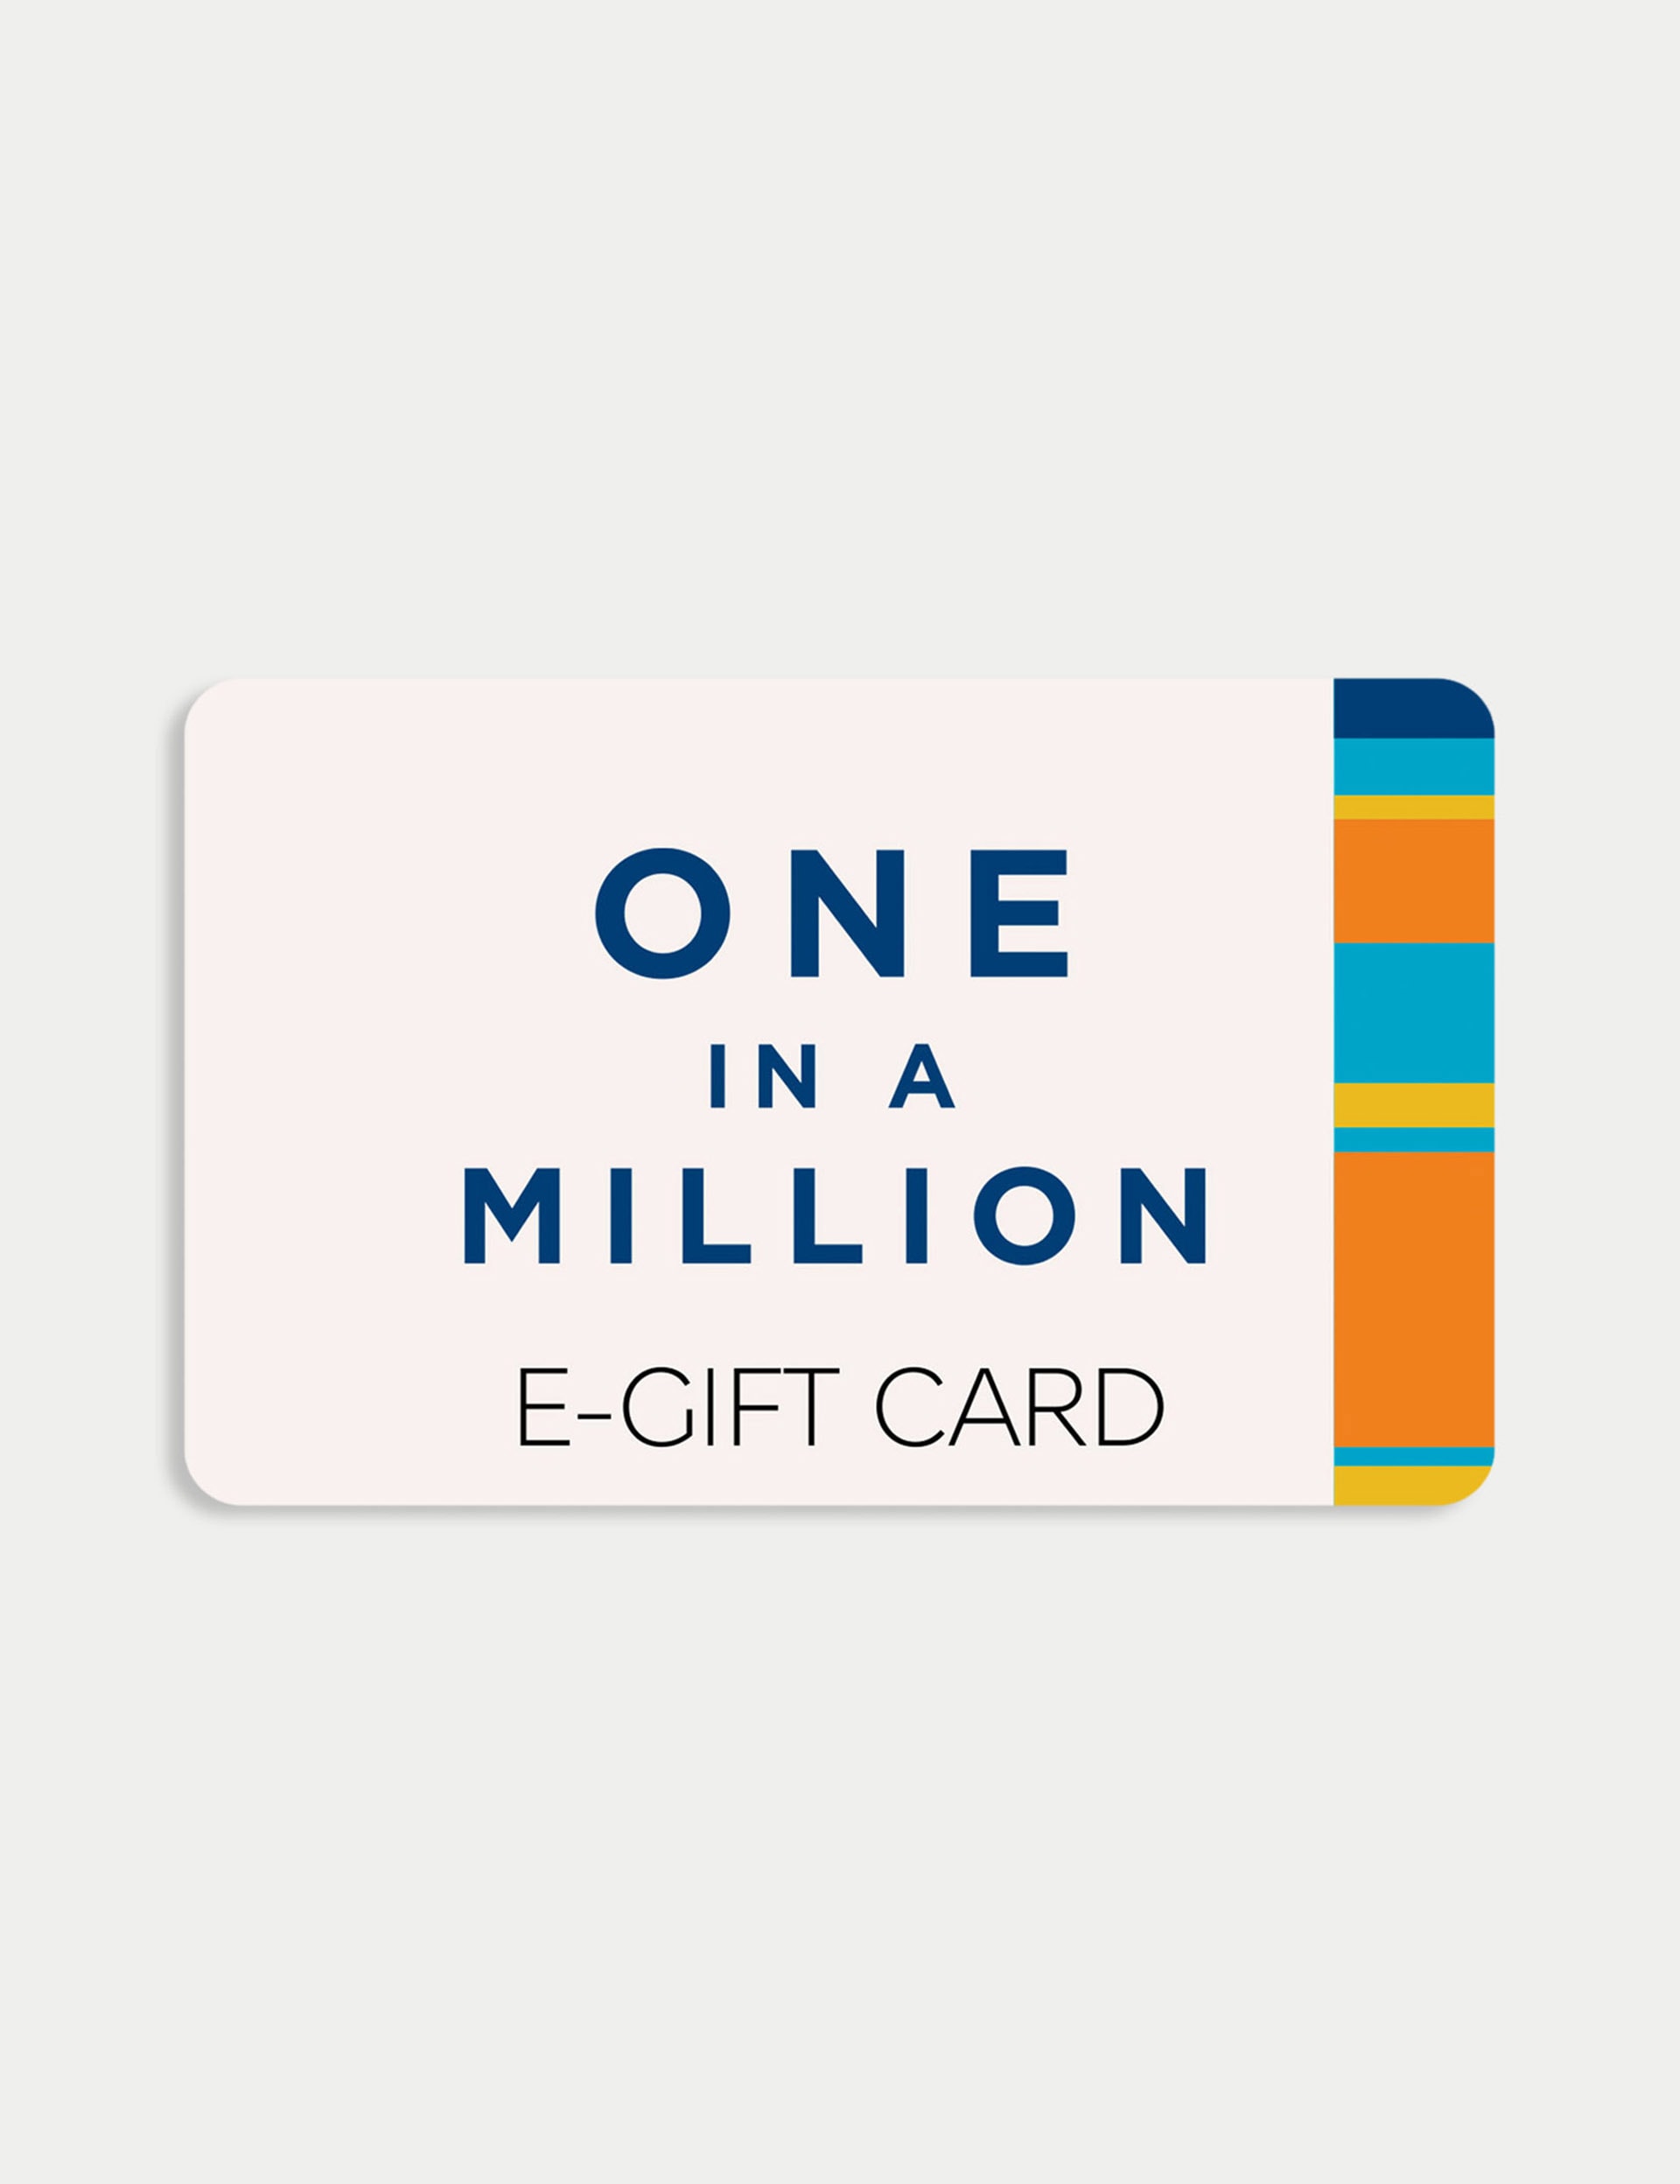 One in a Million E-Gift Card